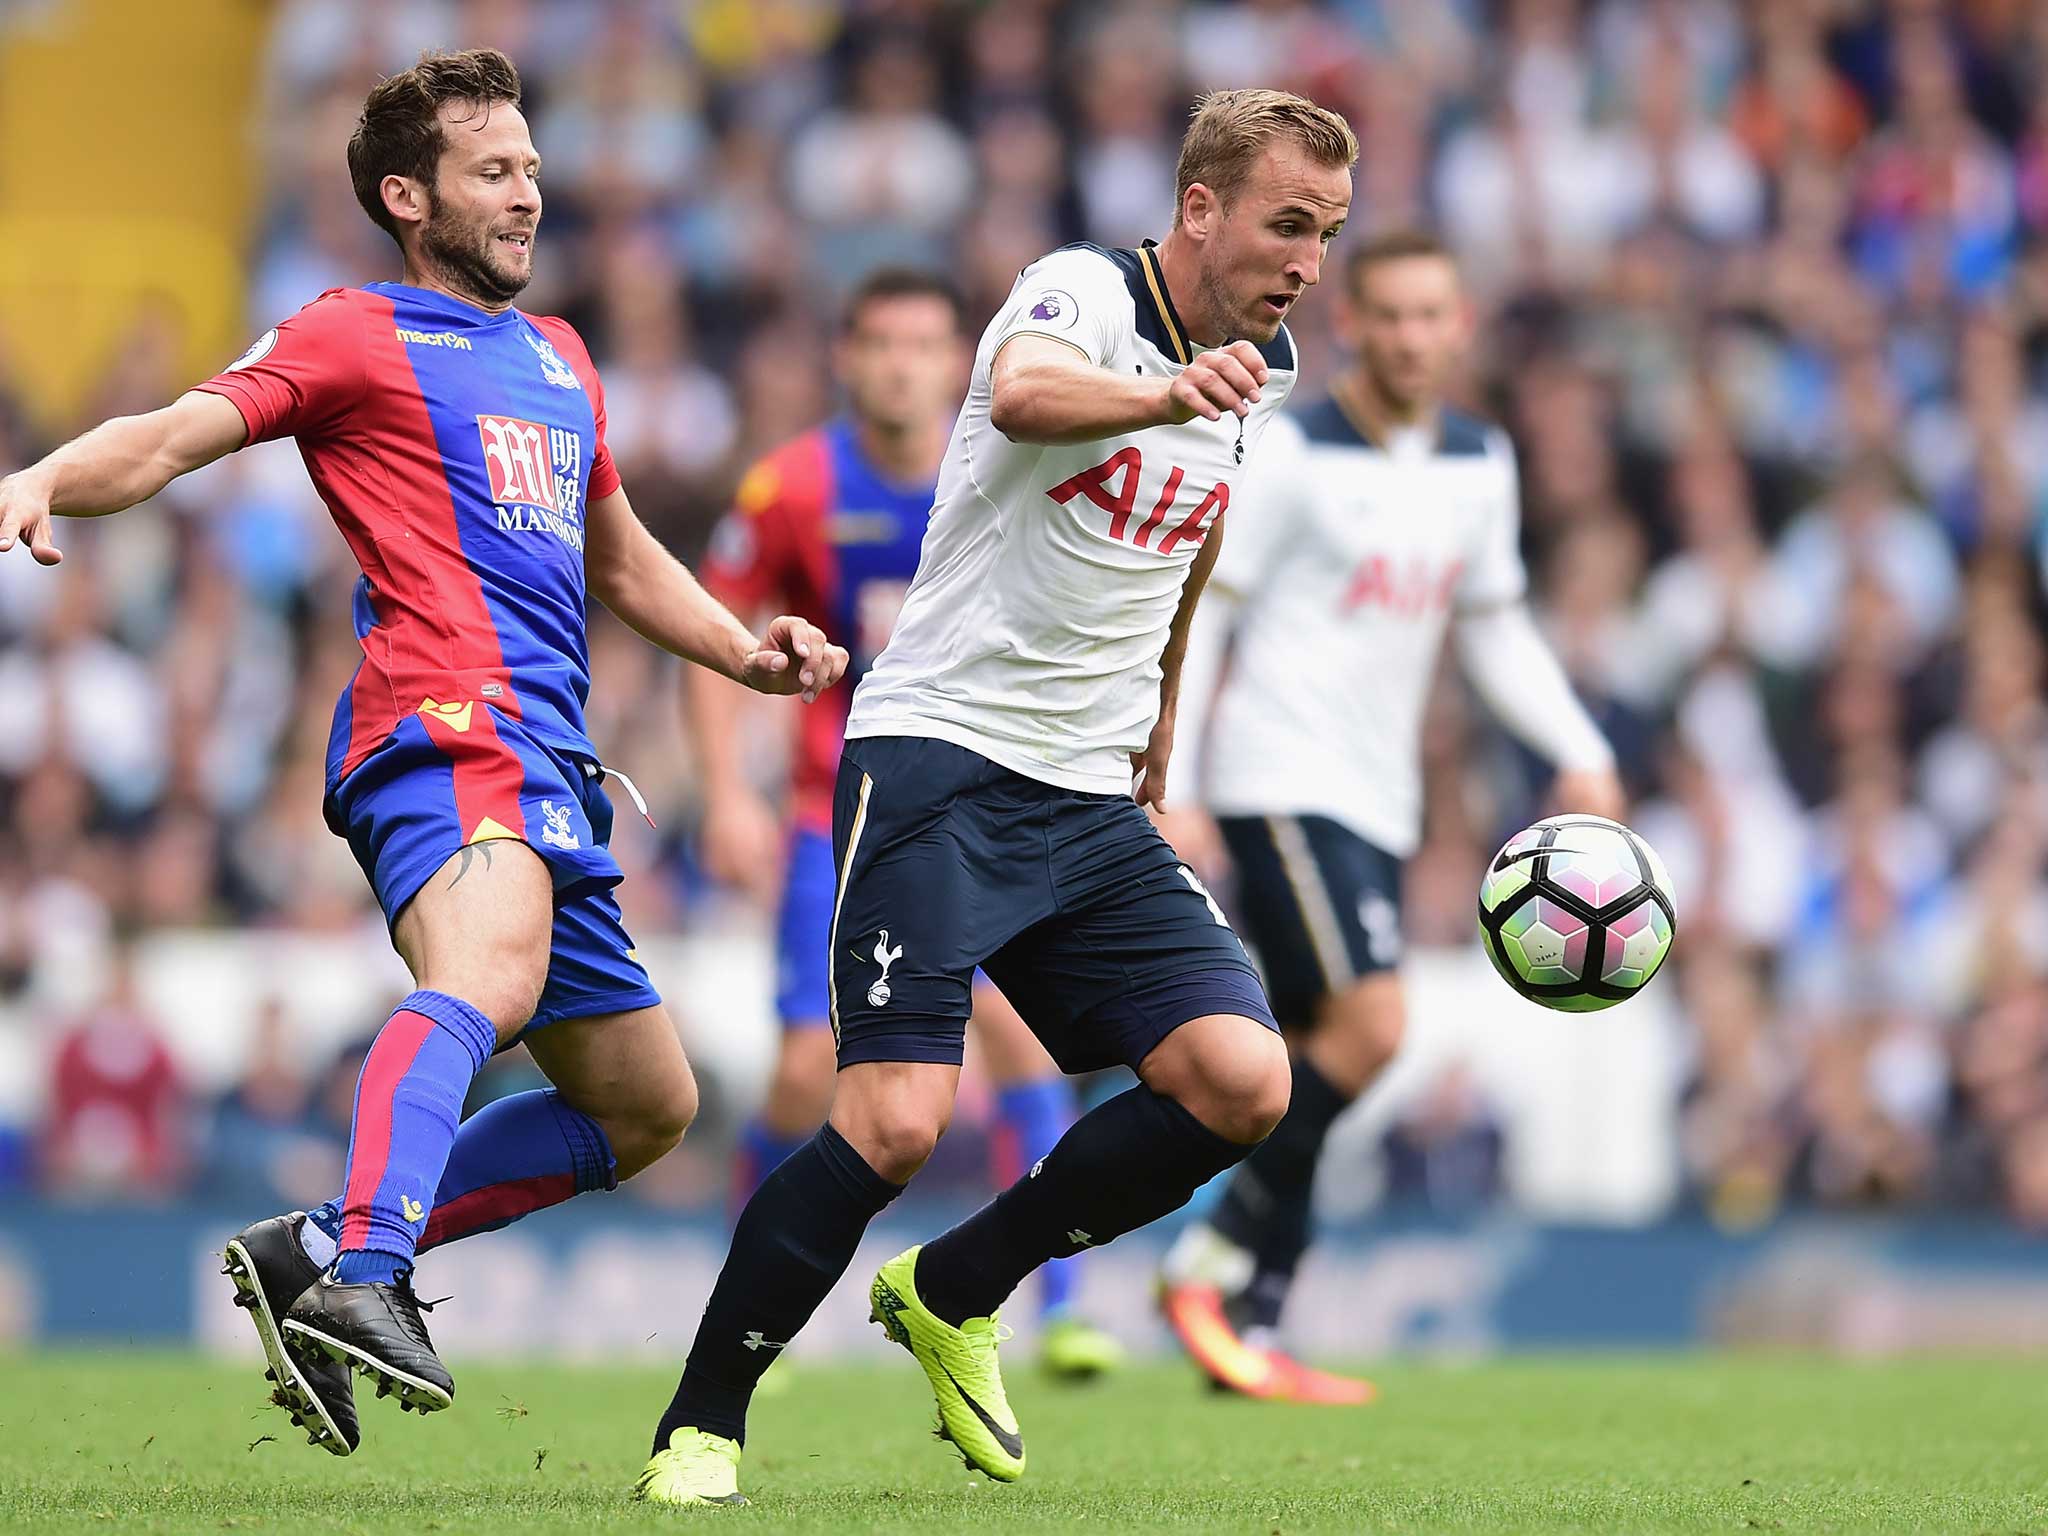 &#13;
Kane is a regular slow starter, but he'll come good once again for club and country &#13;